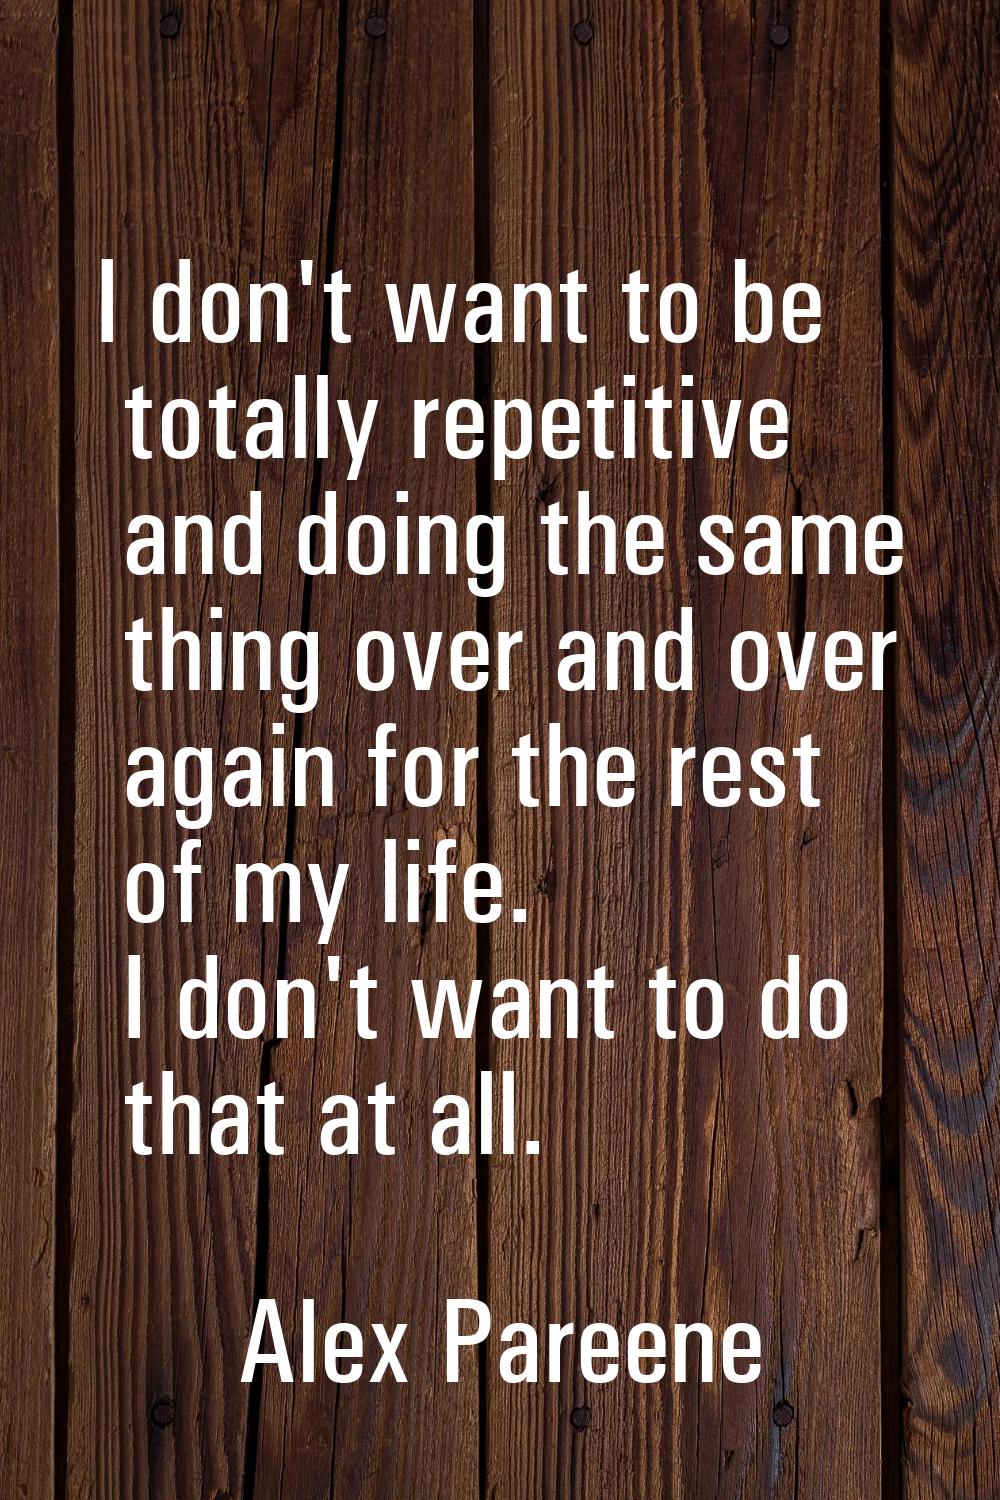 I don't want to be totally repetitive and doing the same thing over and over again for the rest of 